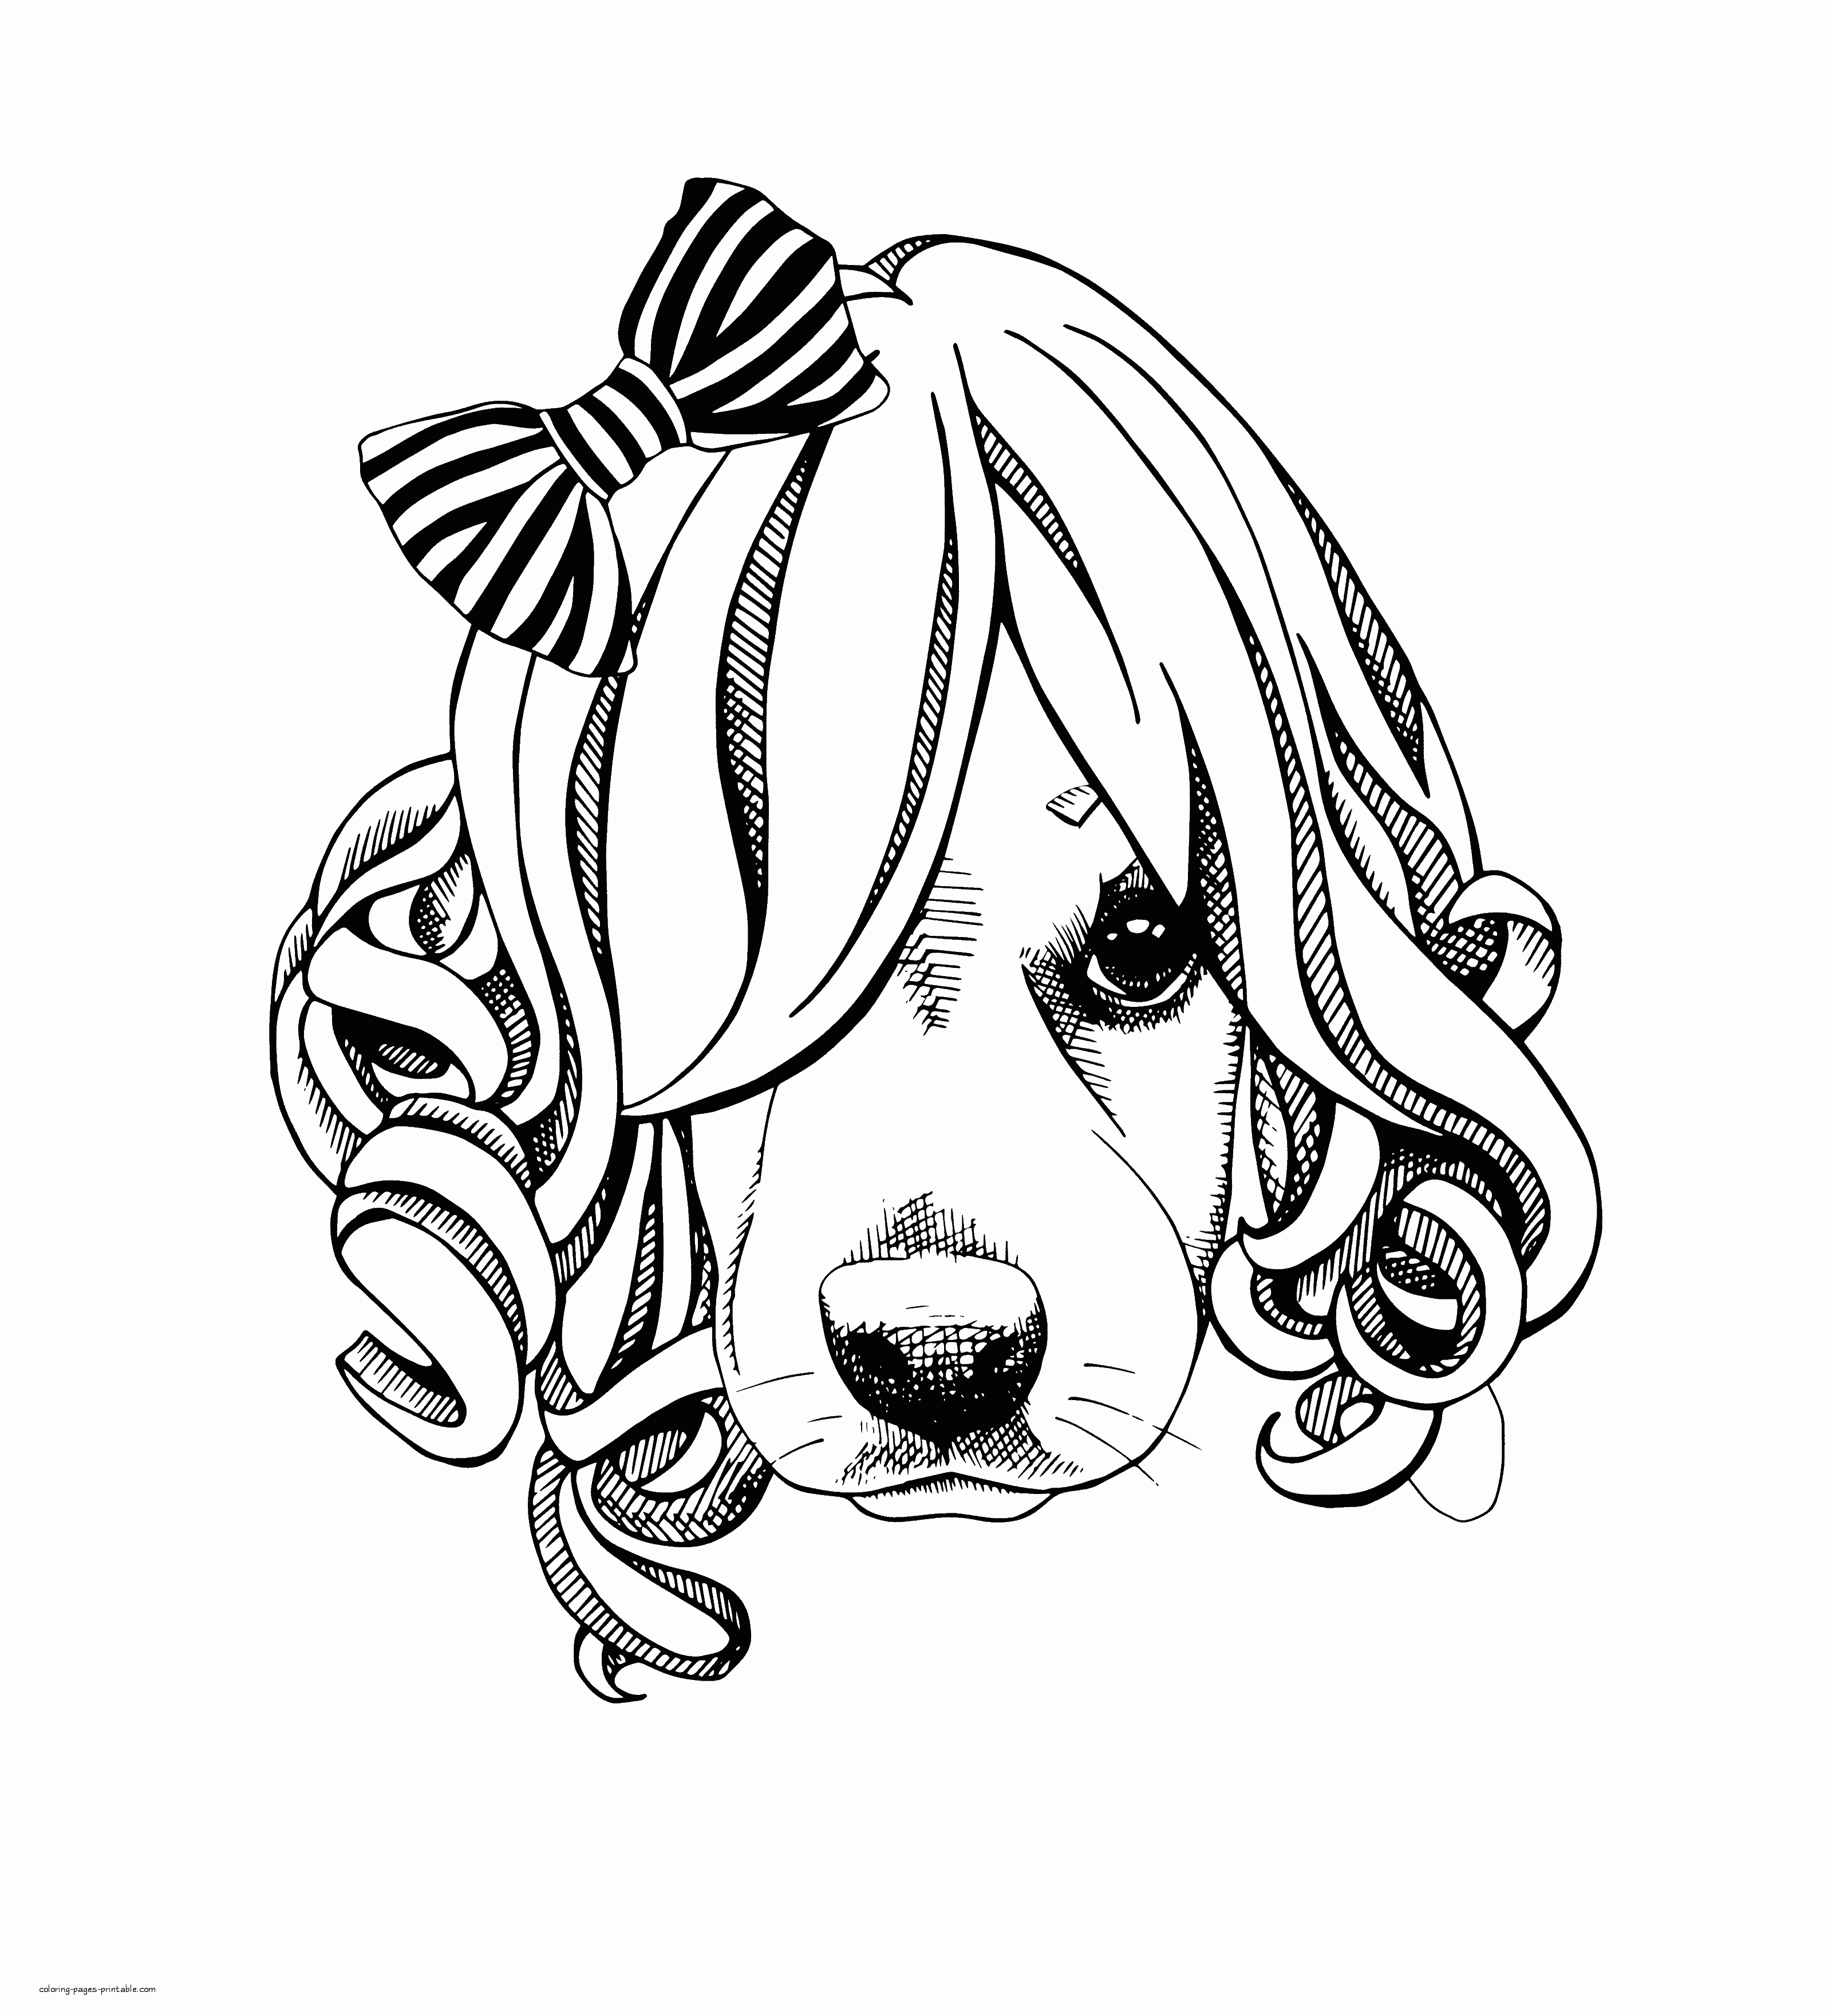 Dog Face Coloring Page    COLORING PAGES PRINTABLE.COM